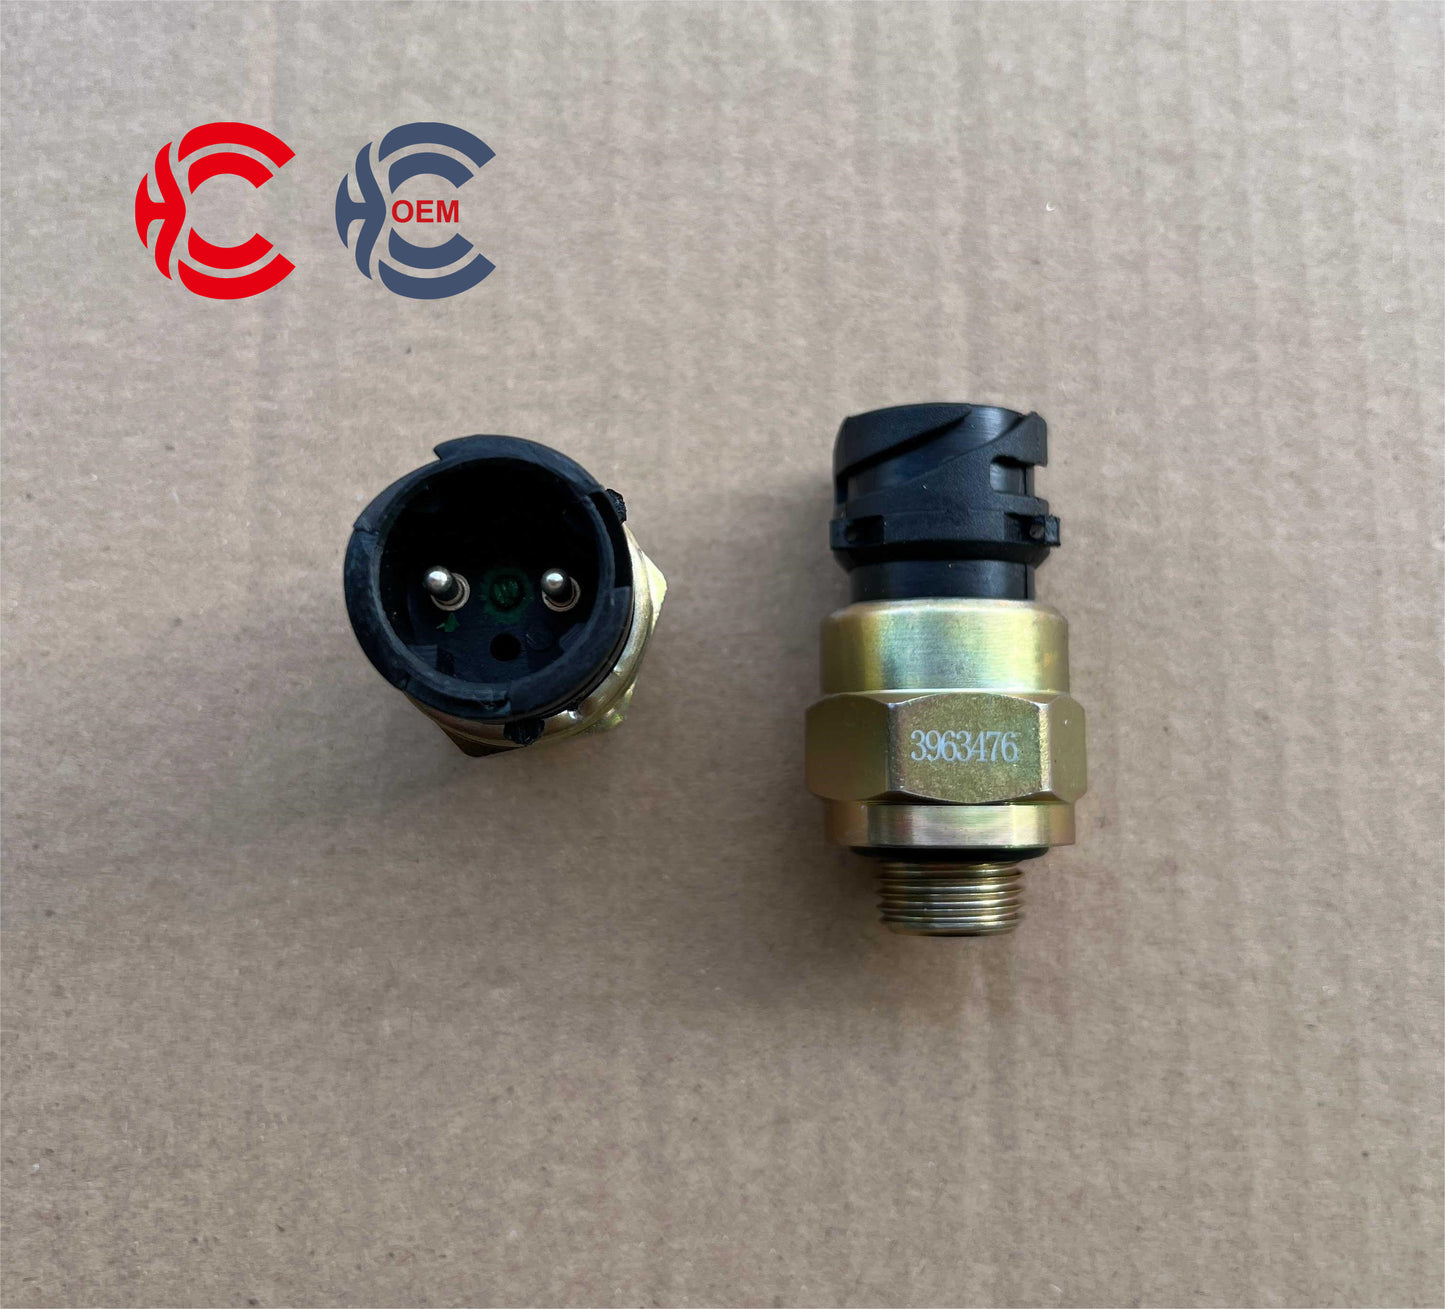 OEM: 3963476Material: ABS MetalColor: GoldenOrigin: Made in ChinaWeight: 100gPacking List: 1* Oil Pressure Sensor More ServiceWe can provide OEM Manufacturing serviceWe can Be your one-step solution for Auto PartsWe can provide technical scheme for you Feel Free to Contact Us, We will get back to you as soon as possible.